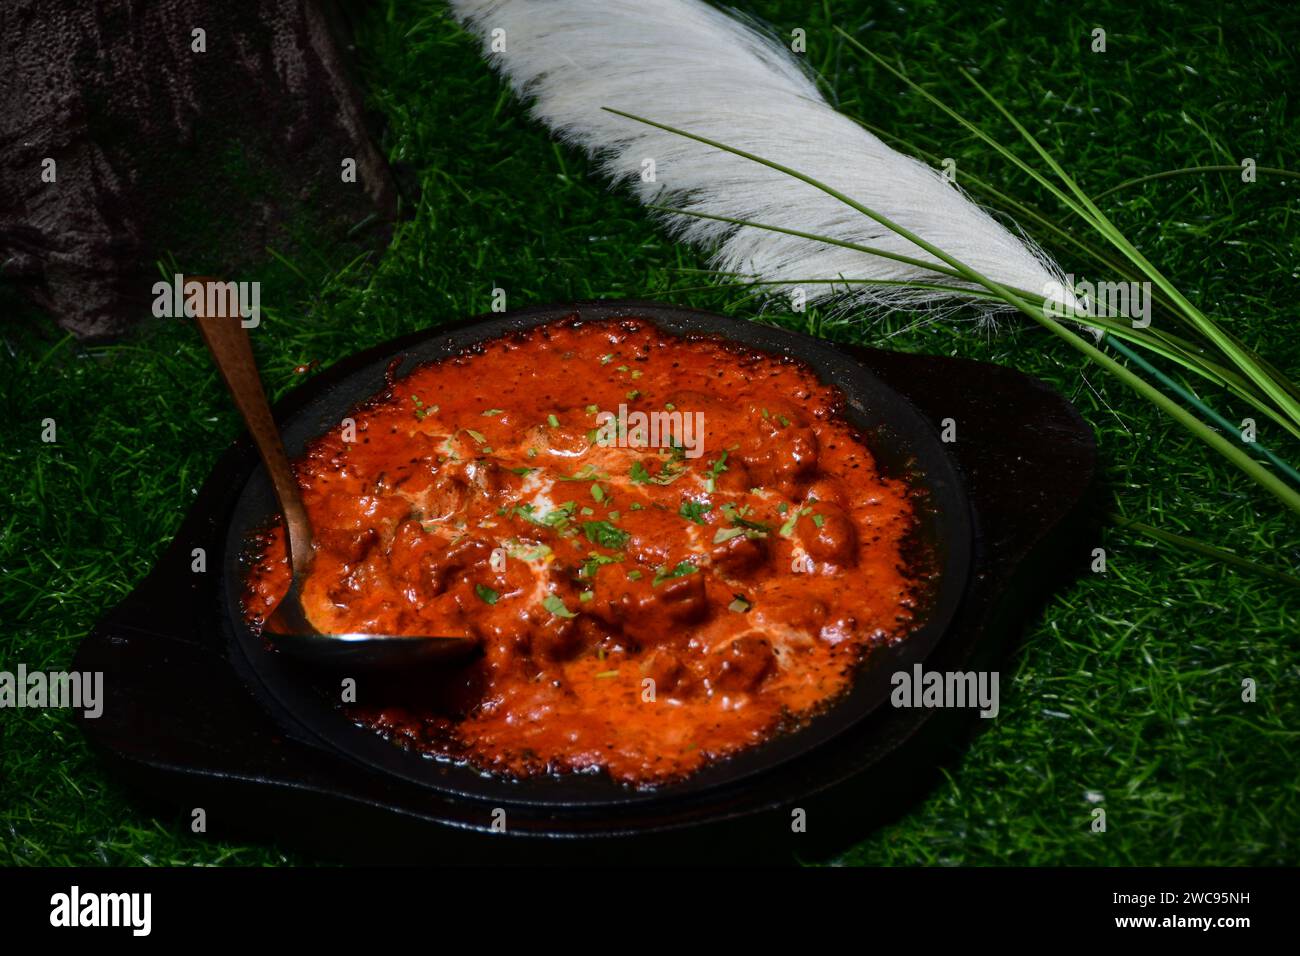 A delicious and aromatic meat curry is beautifully presented in a sleek black bowl Stock Photo